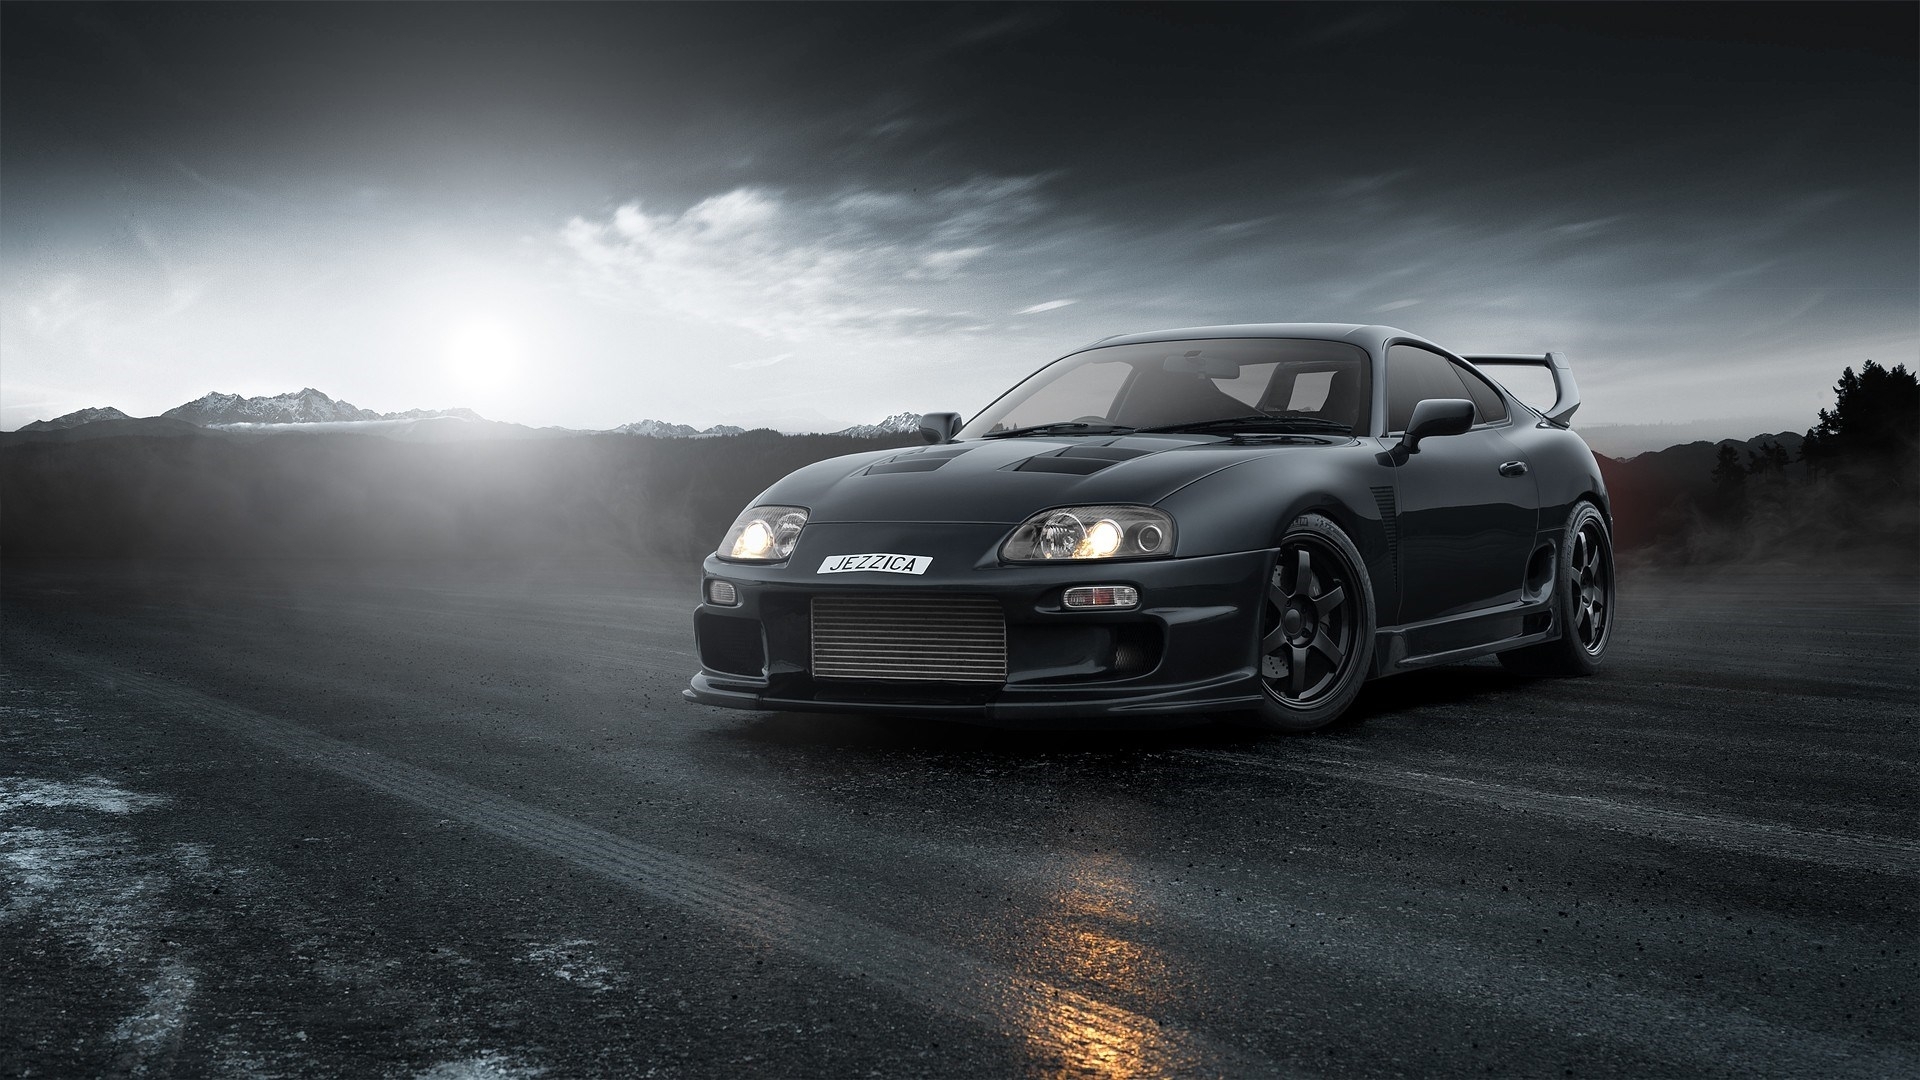 10 Top Toyota Supra Wallpaper 1920X1080 FULL HD 1920×1080 For PC Background